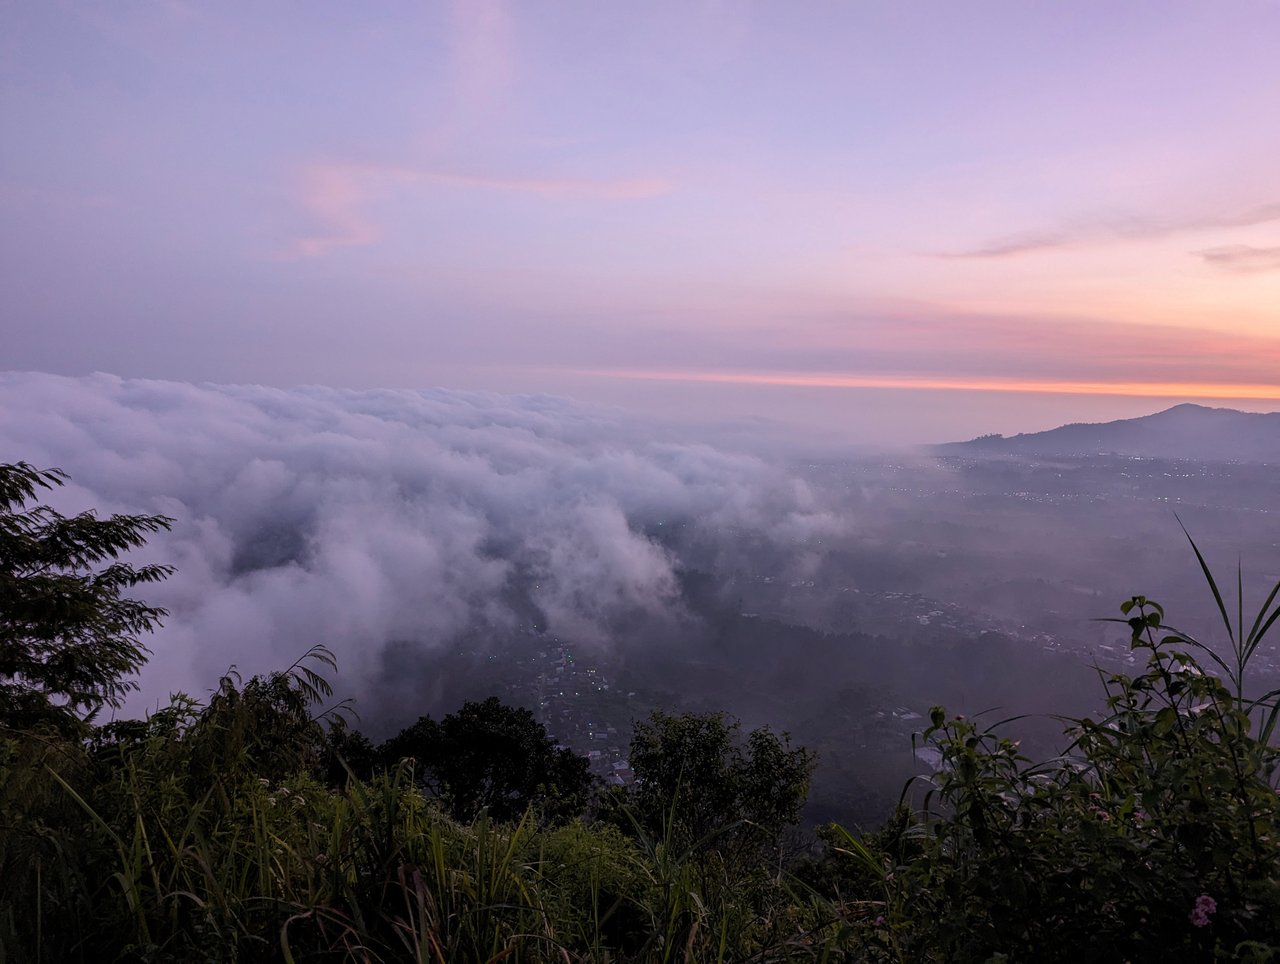 Camping at the Summit of Mount Tanggung: An Adventure to Enjoy the Beauty of Sunrise